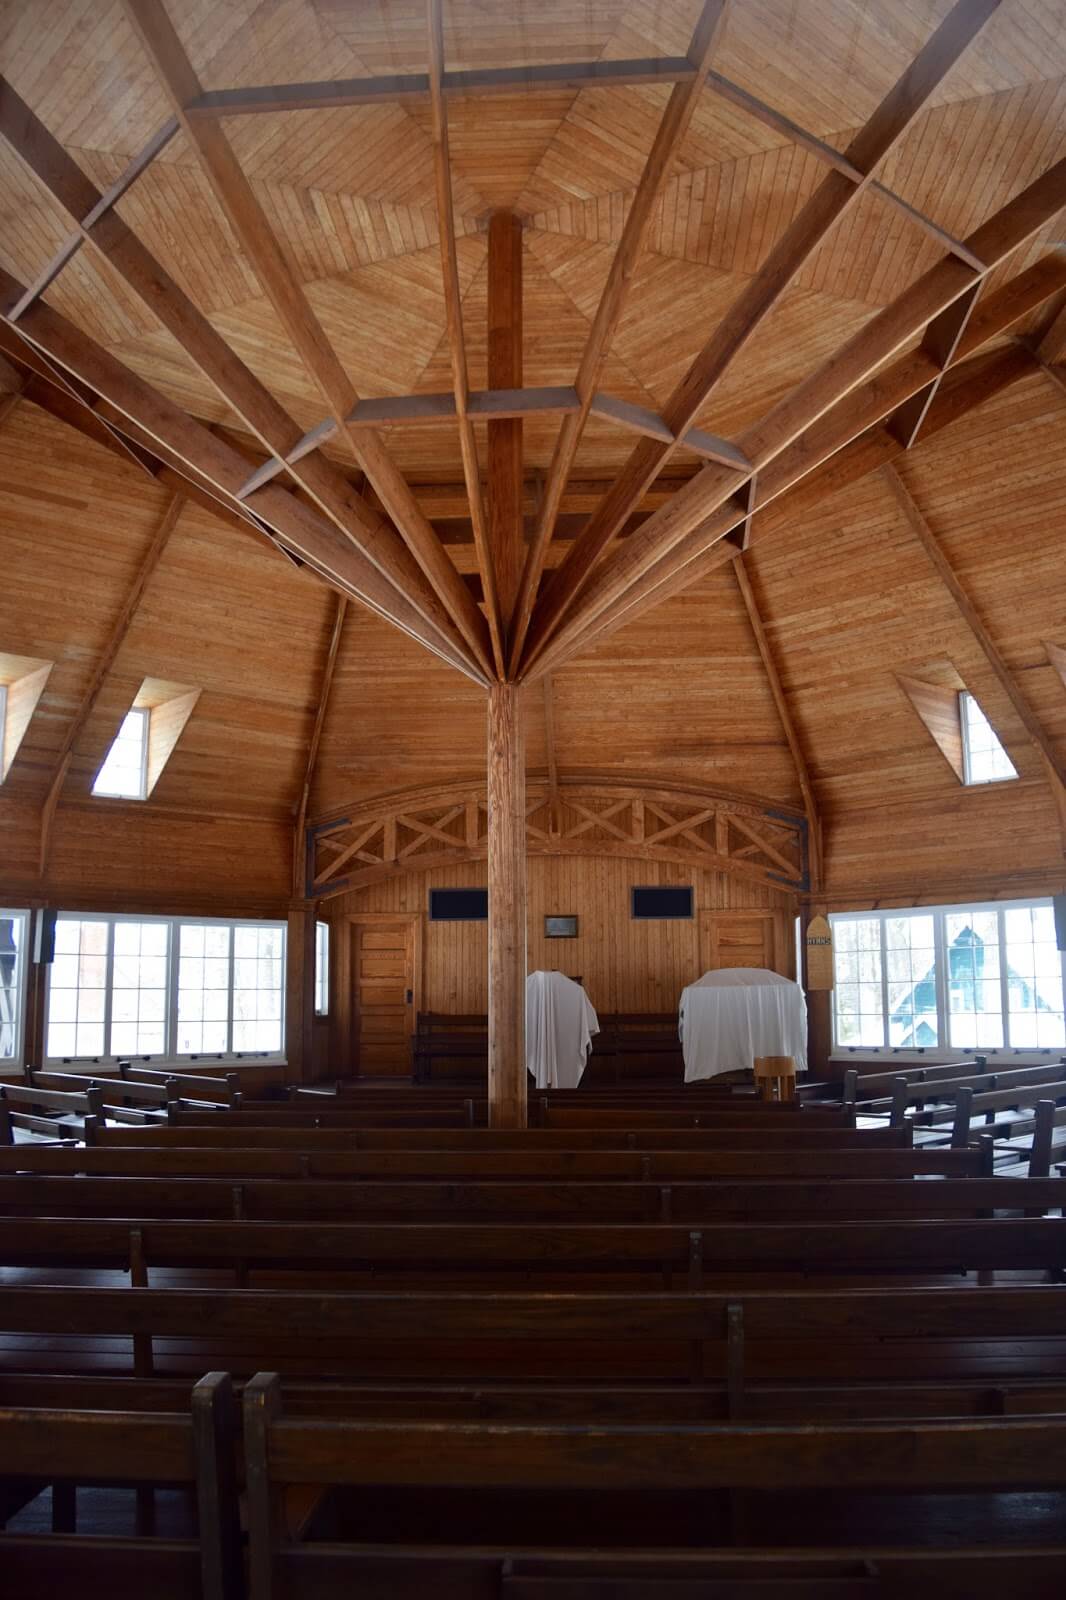 The wooden interior of the octagonal church in the sould of Sturgeon Point with a singular pillar in the centre